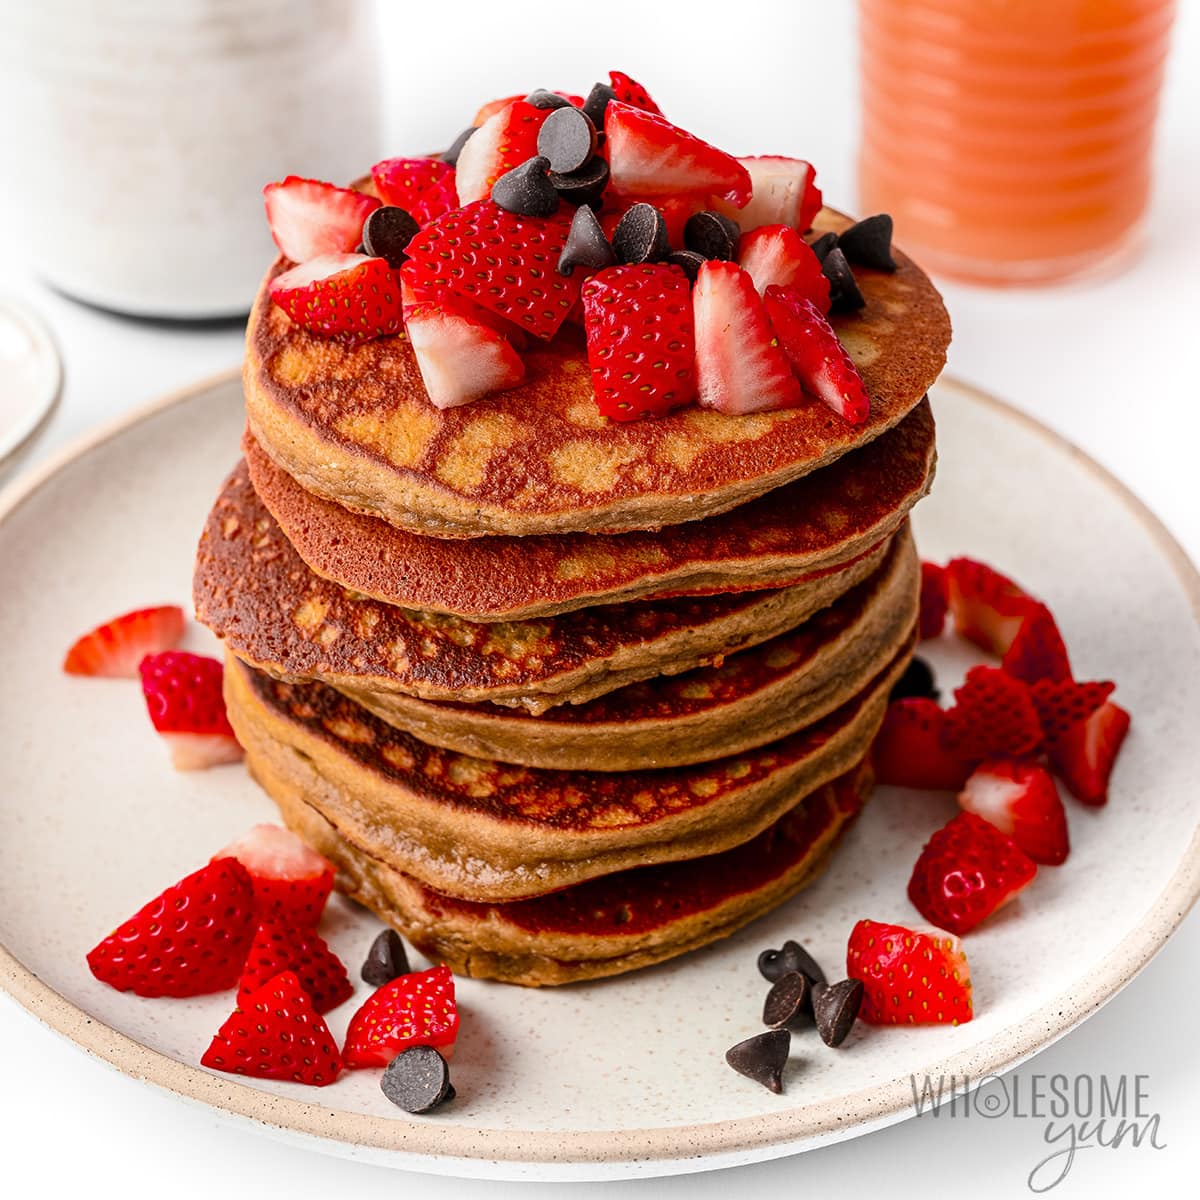 Finished protein pancakes recipe.